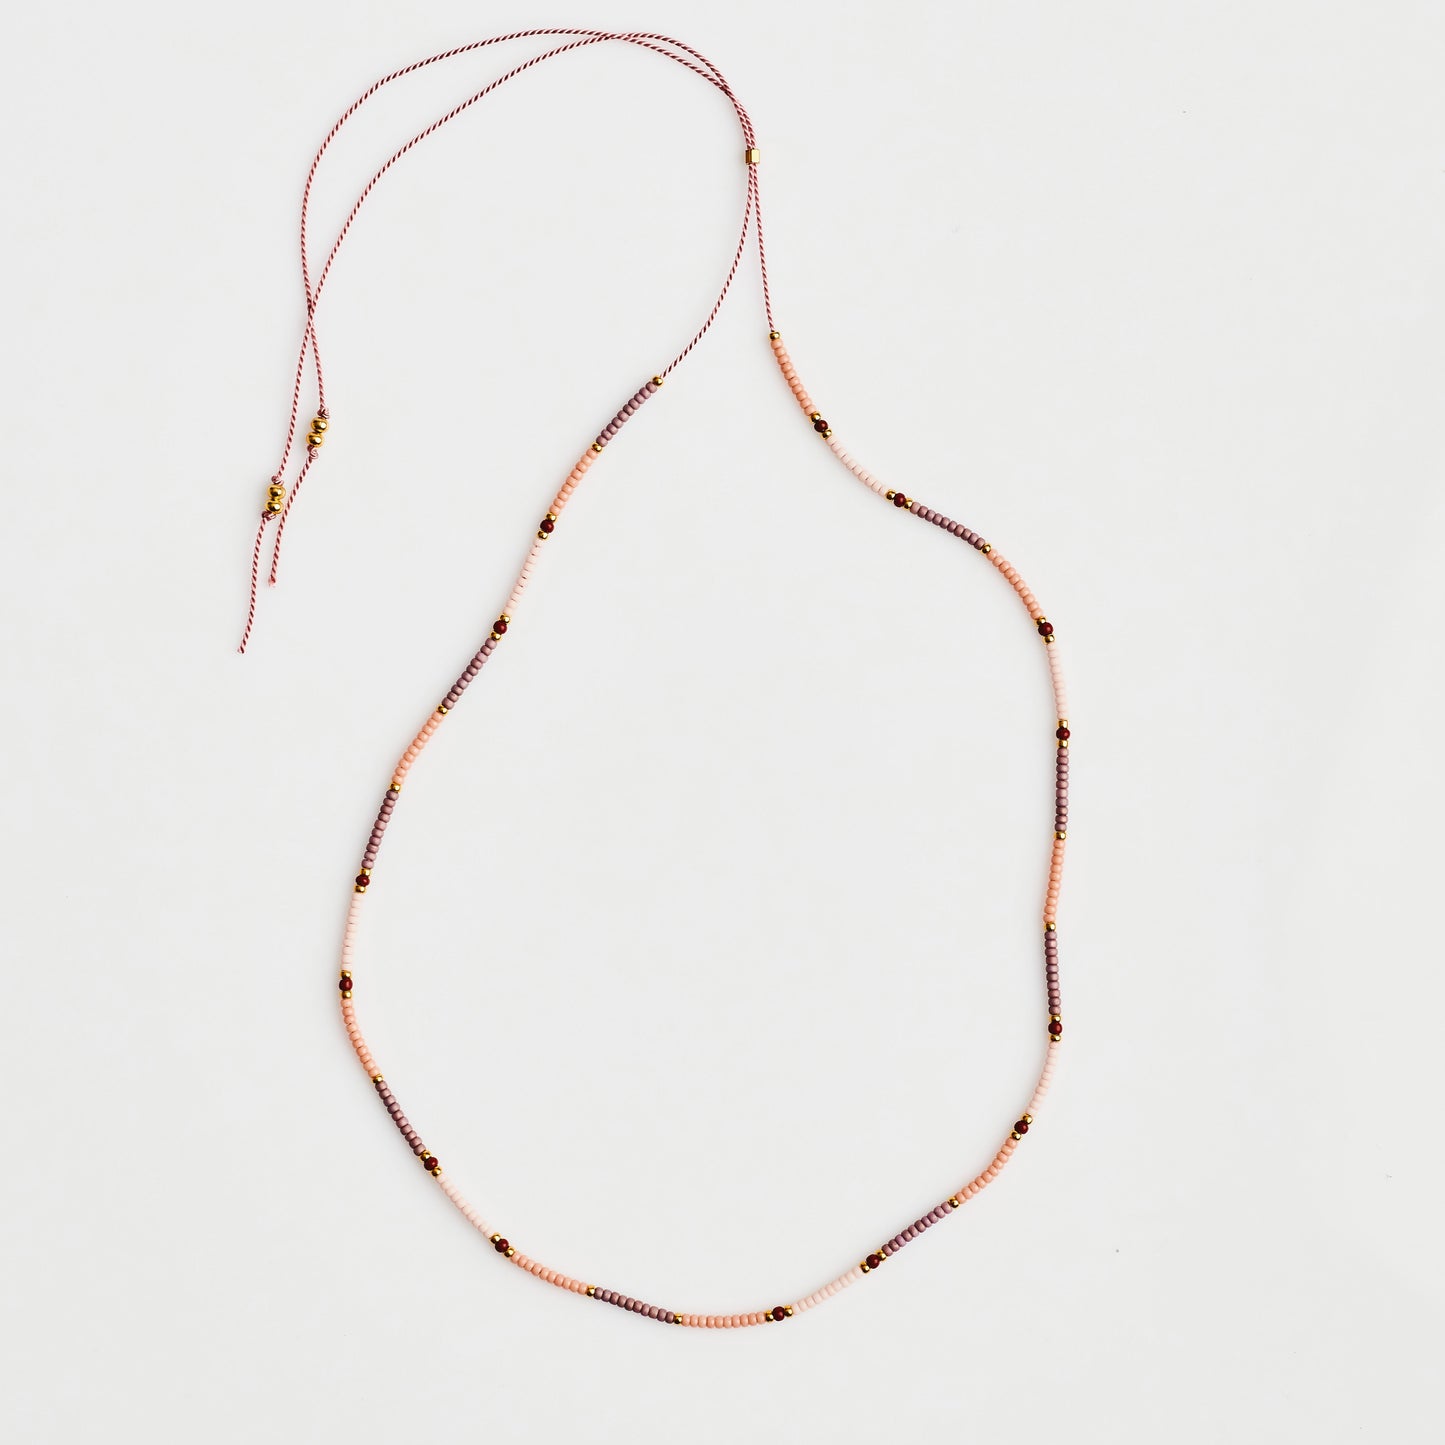 Dusty Pinks Necklace